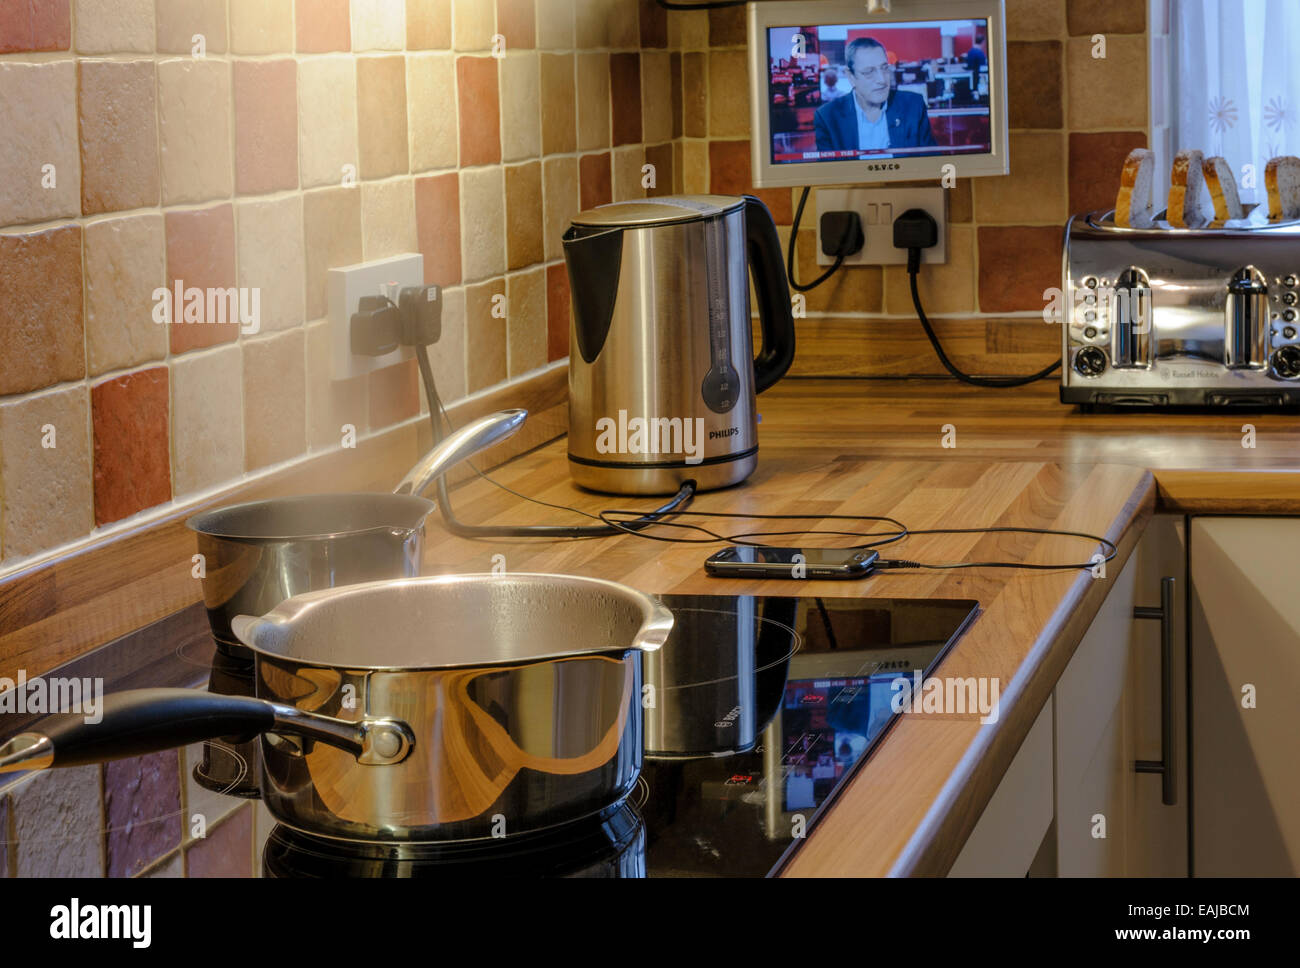 Many appliances being used in a modern kitchen.Heavy electrical consumption. Stock Photo